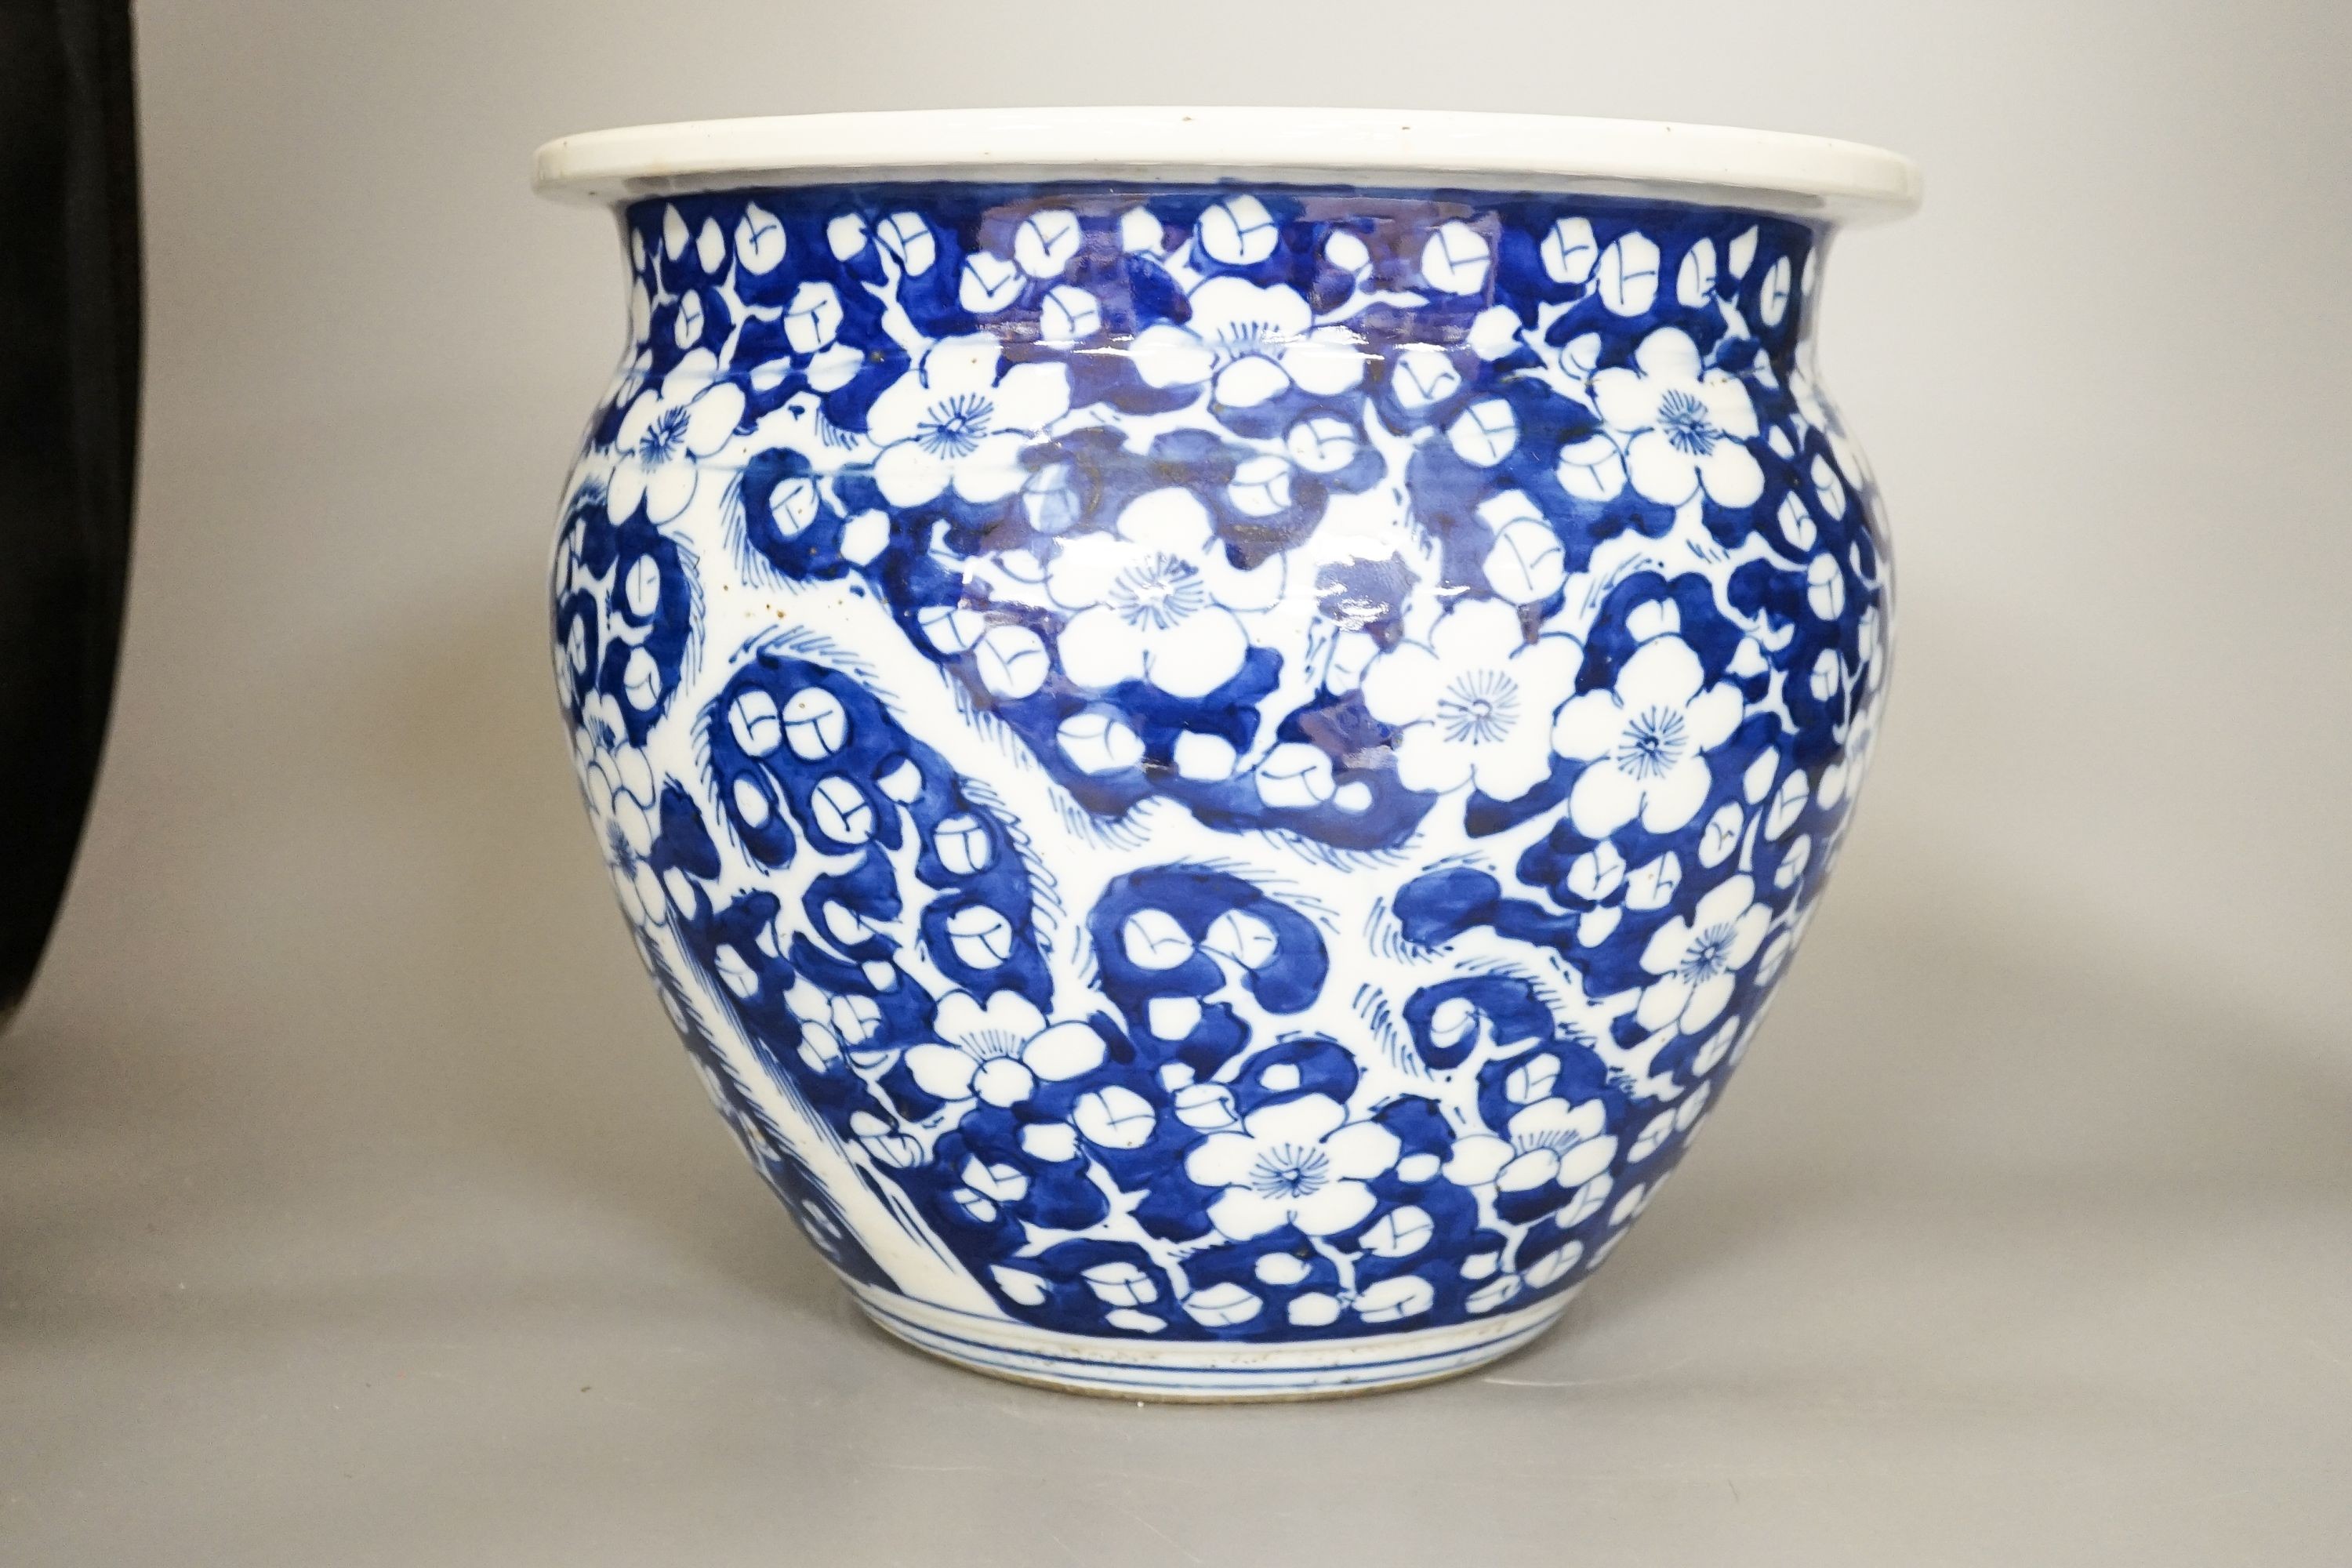 Two 19th century Chinese porcelain fish bowls, largest 26.5 cm diameter